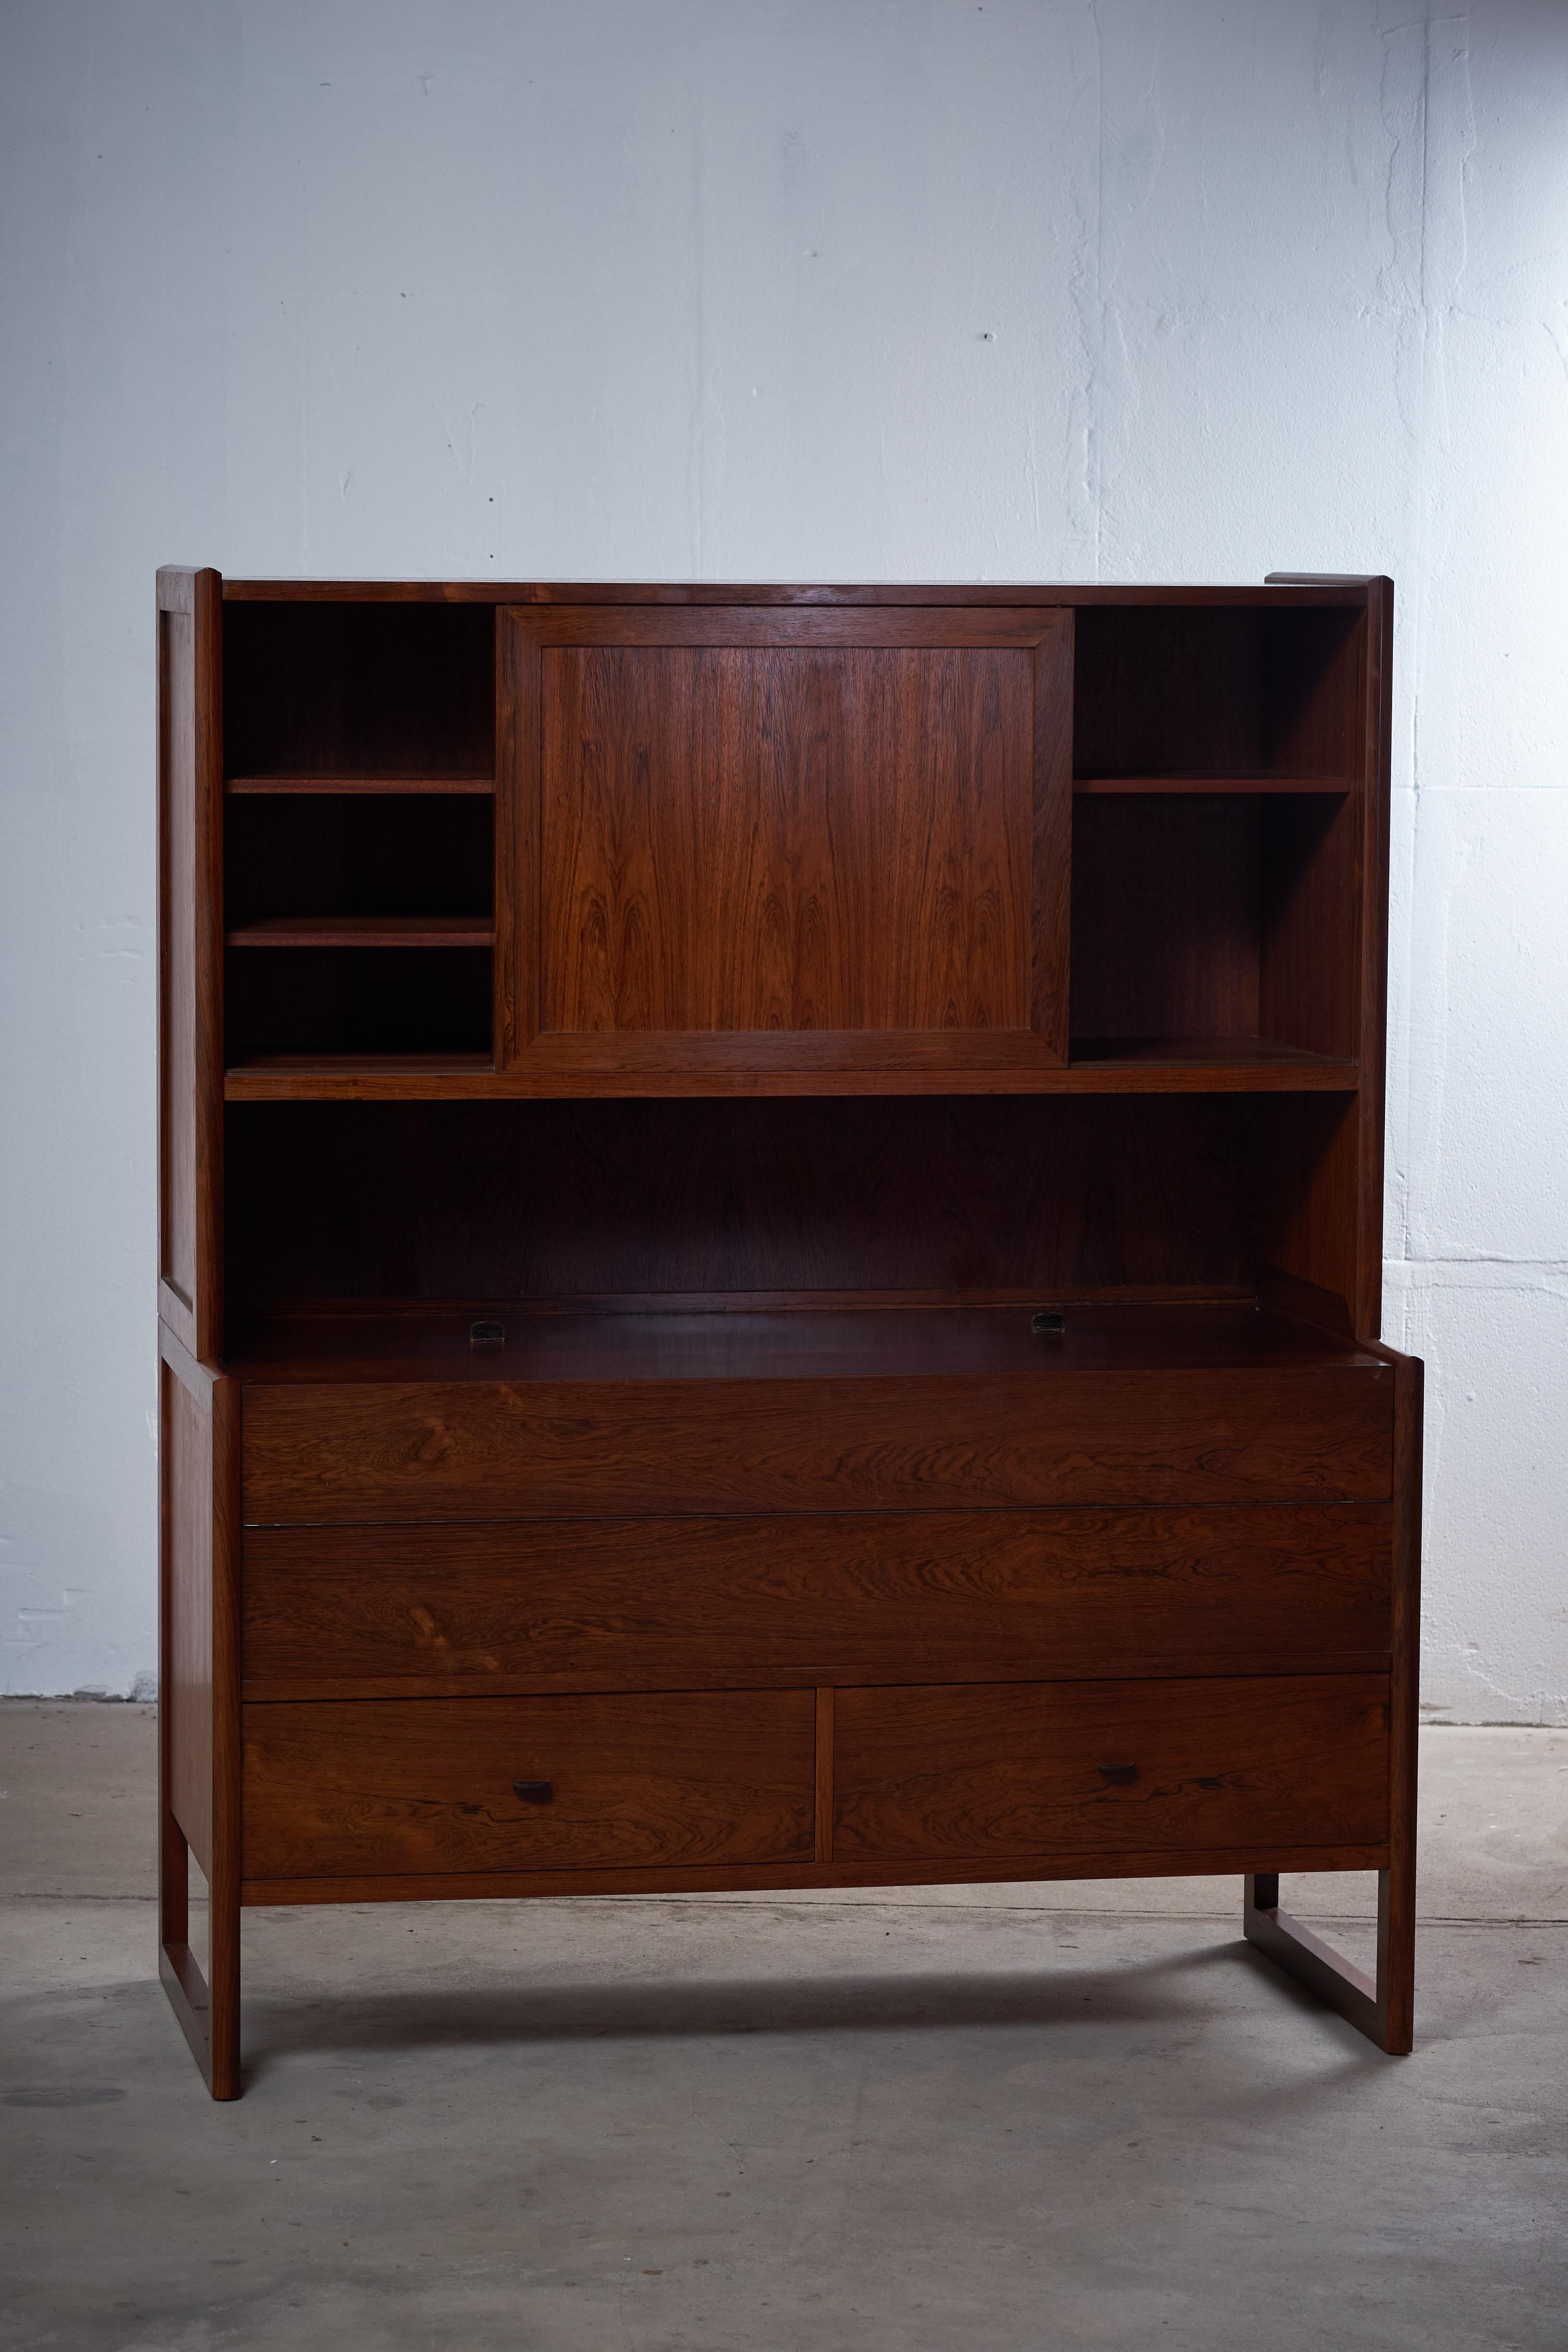 Very special and rare bar/cabinet in rosewood by unknown Danish designer.
Unfortunately, I have not been able to find the designer on this item, but designer or not, this is really a nice and well-executed piece of carpentry work. Many hours have